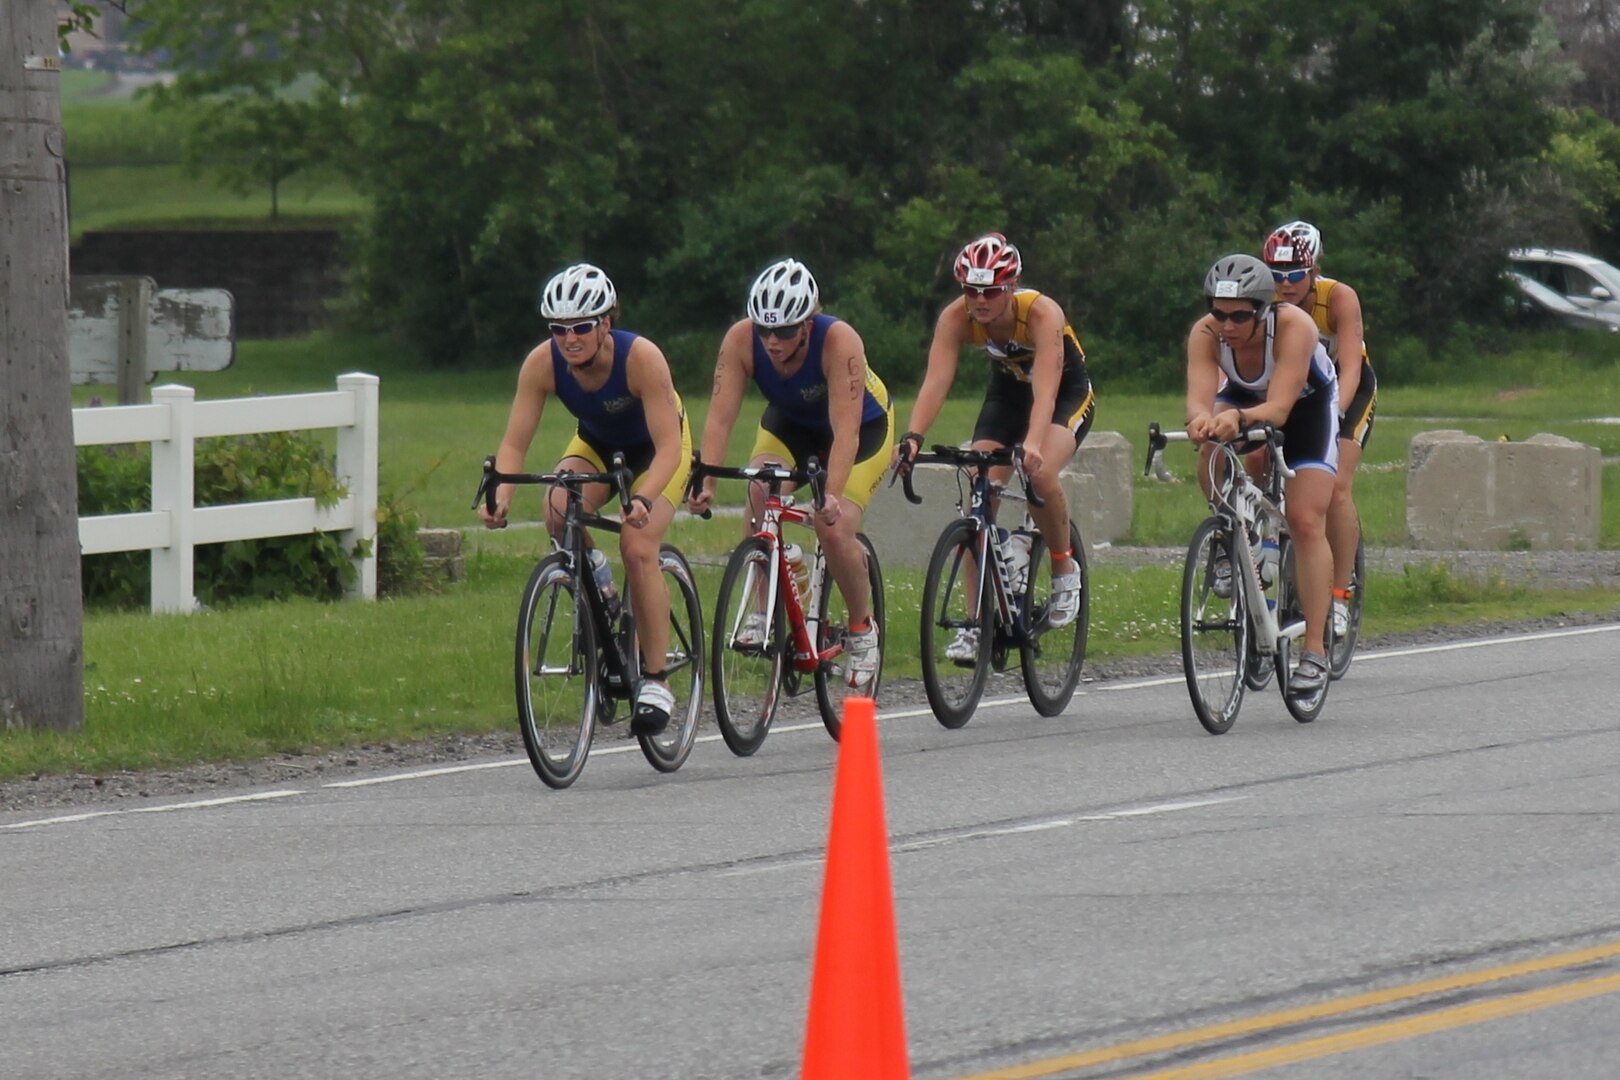 Armed Forces Women’s Triathlon Champion Army 2nd lt. Samone Franzese of Fort Sam Houston, Texas (center) along with other women riders during the 2015 Armed Forces Triathlon Championship at Wolf Lake in Hammond, Ind. held in conjunction with Leon's Triathlon on June 7, 2015.